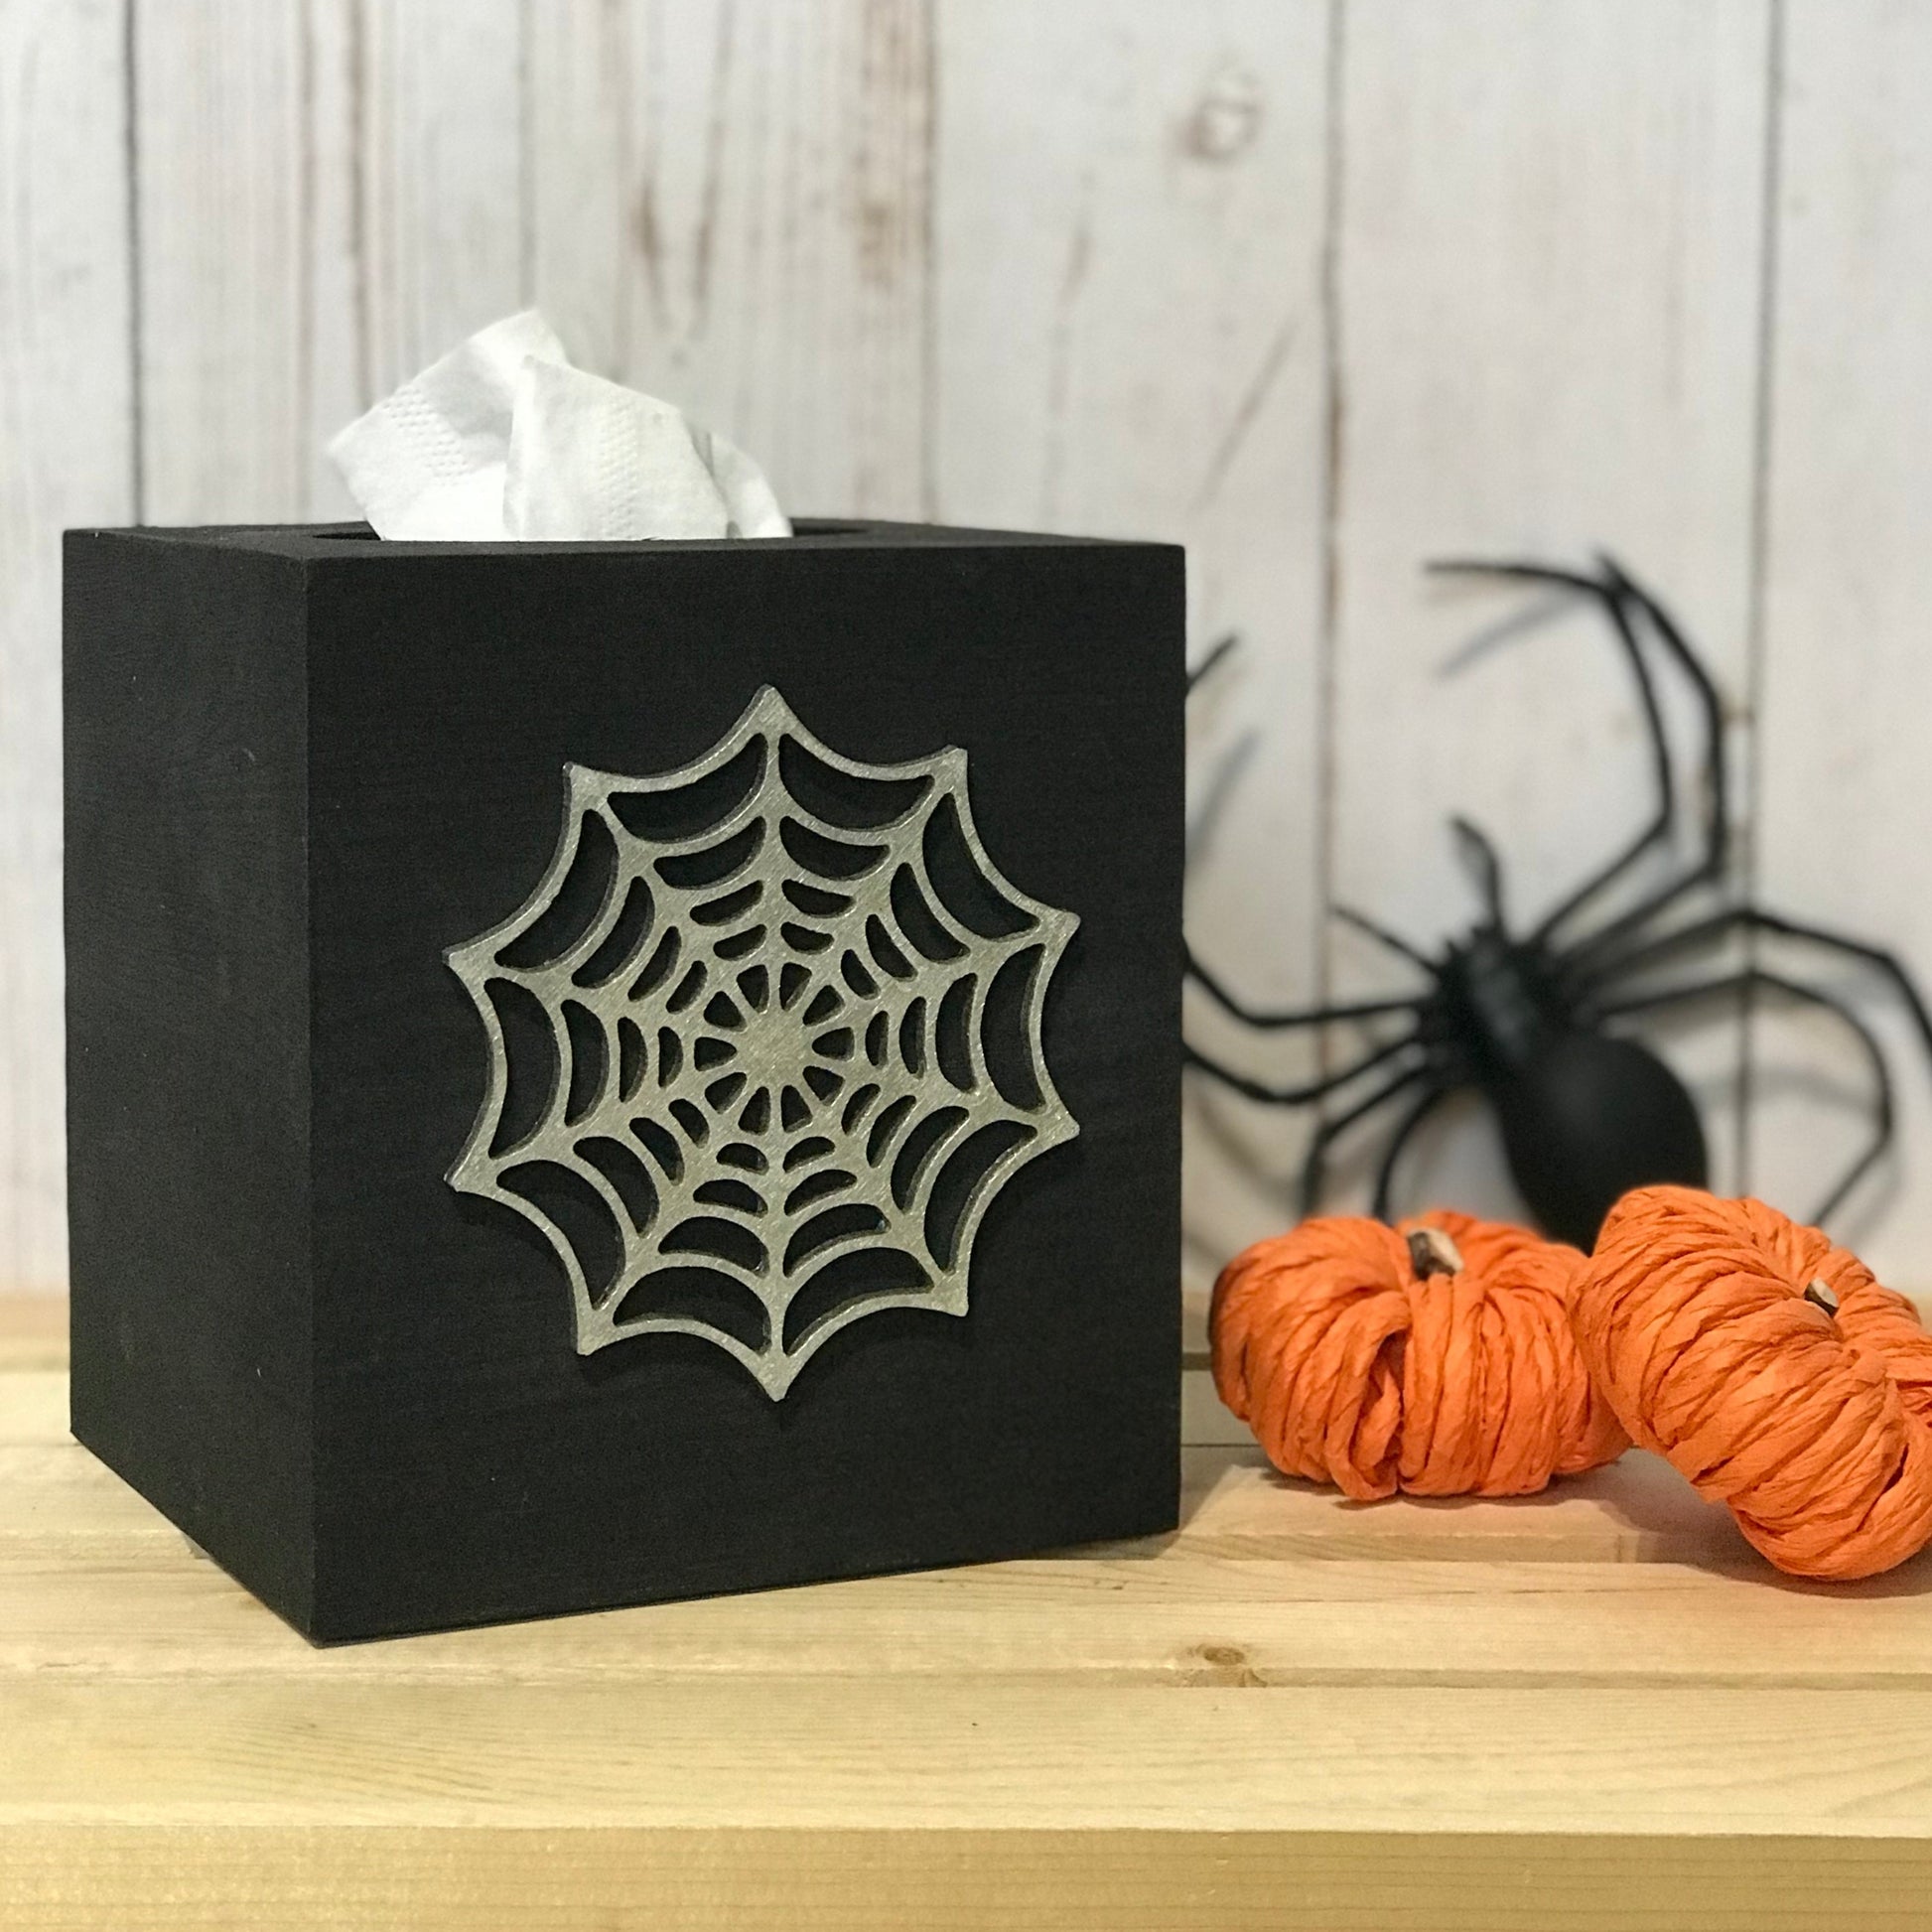 The box measures 5.75 inch x 5.25 inch and will fit any standard size facial tissue box (tissues not included). The silver metallic spiderweb wood cutout is on one side. The other 3 sides are painted in black. 